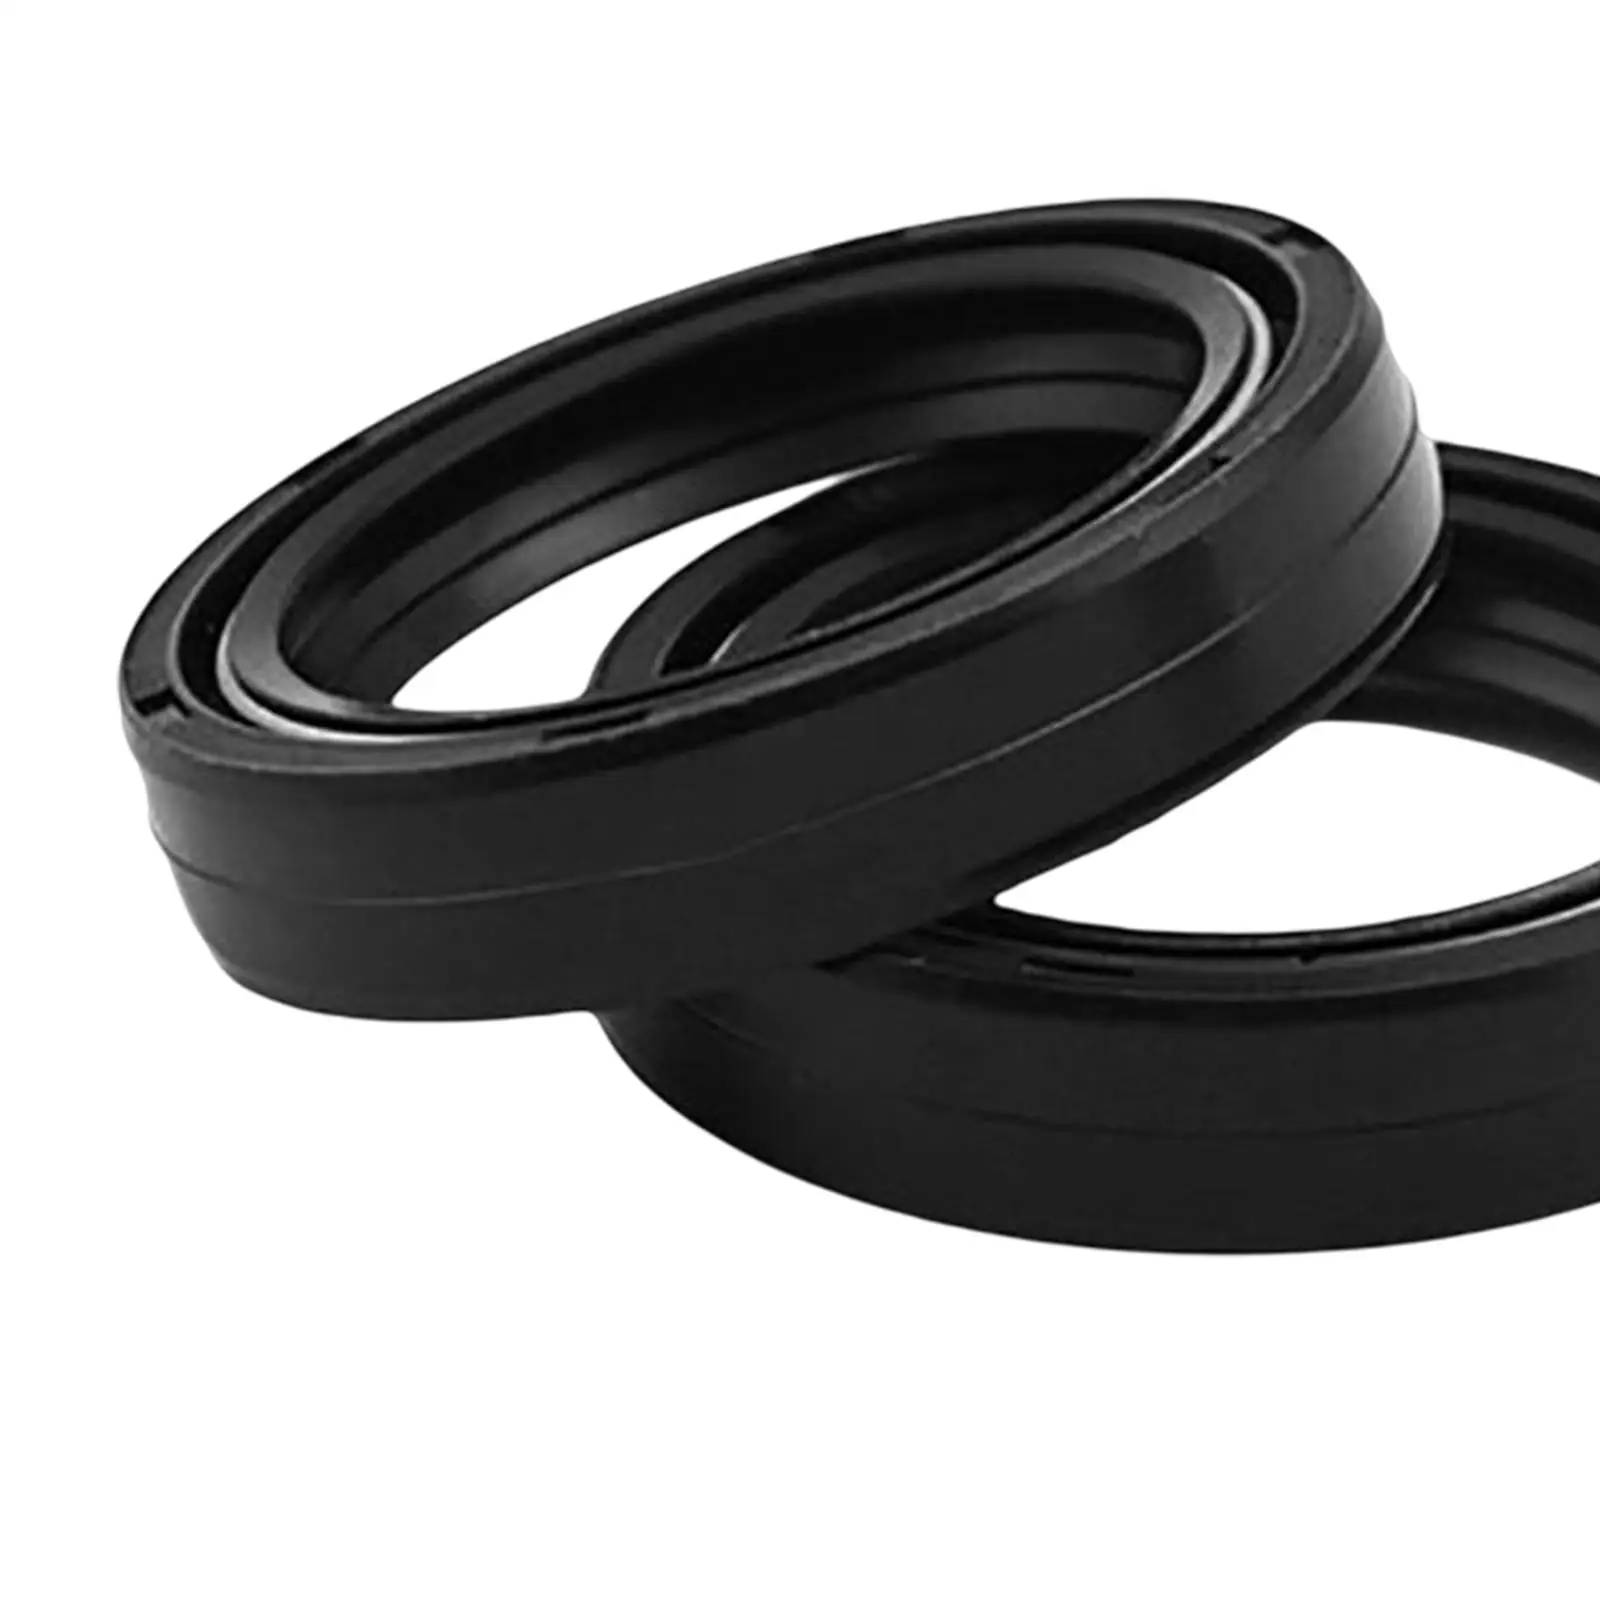 Motorcycle Fork Seal and Dust Seal Kit 49x60x10mm Rubber for Klx400 VN2000 RM250 Dr-Z400E RM125 Replace Parts